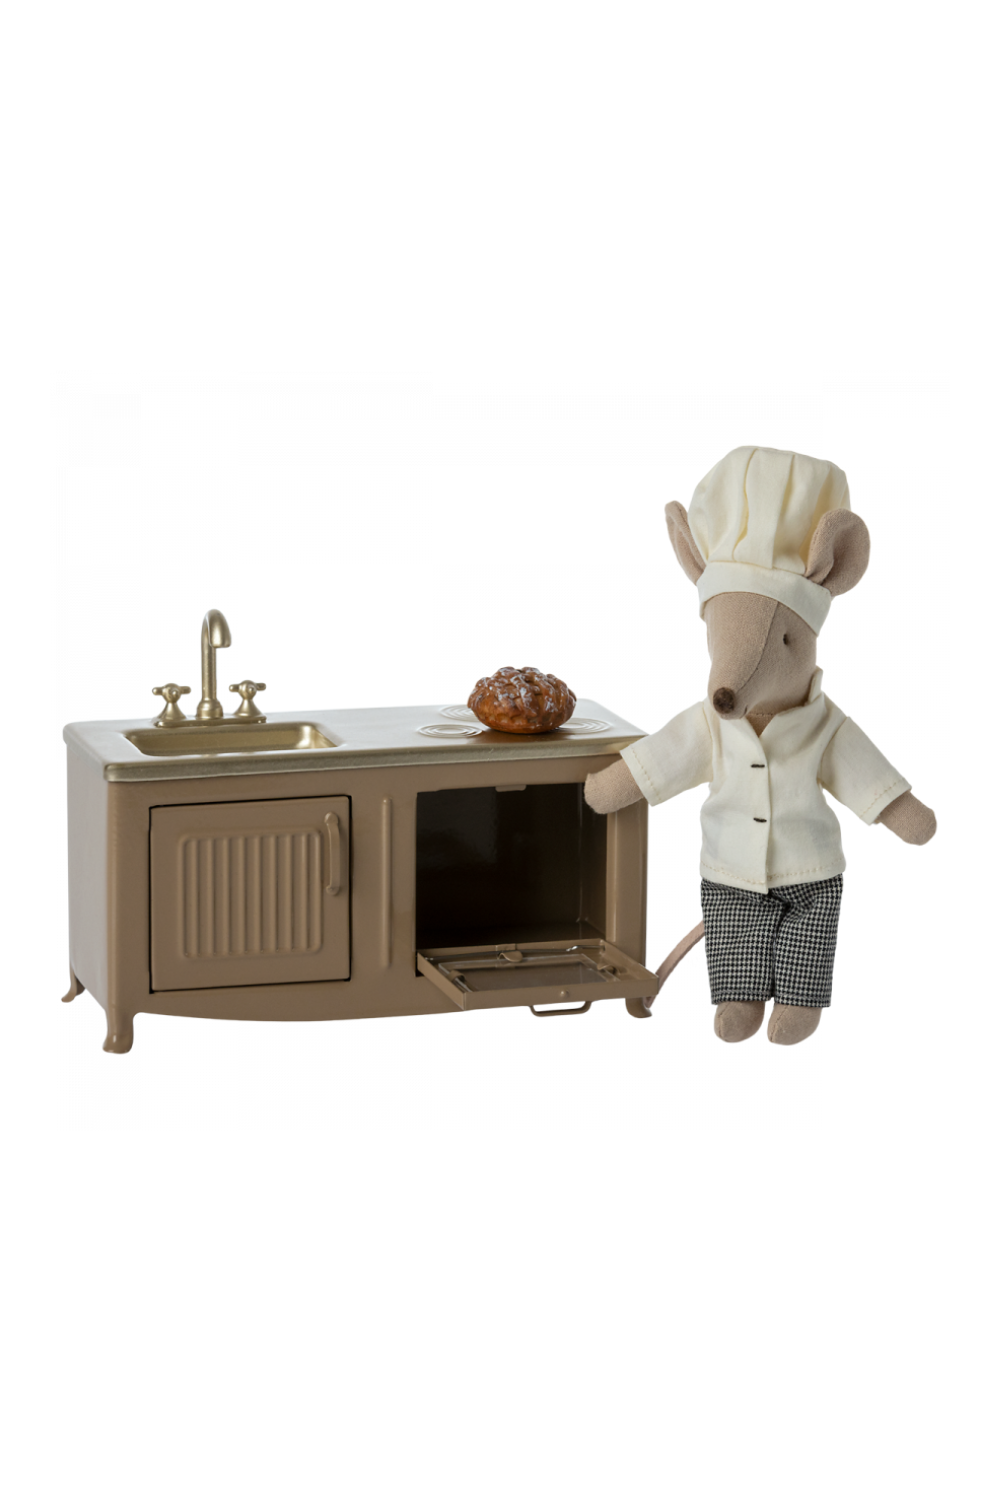 Maileg Kitchen - Mouse Size (Smaller) in Light Brown